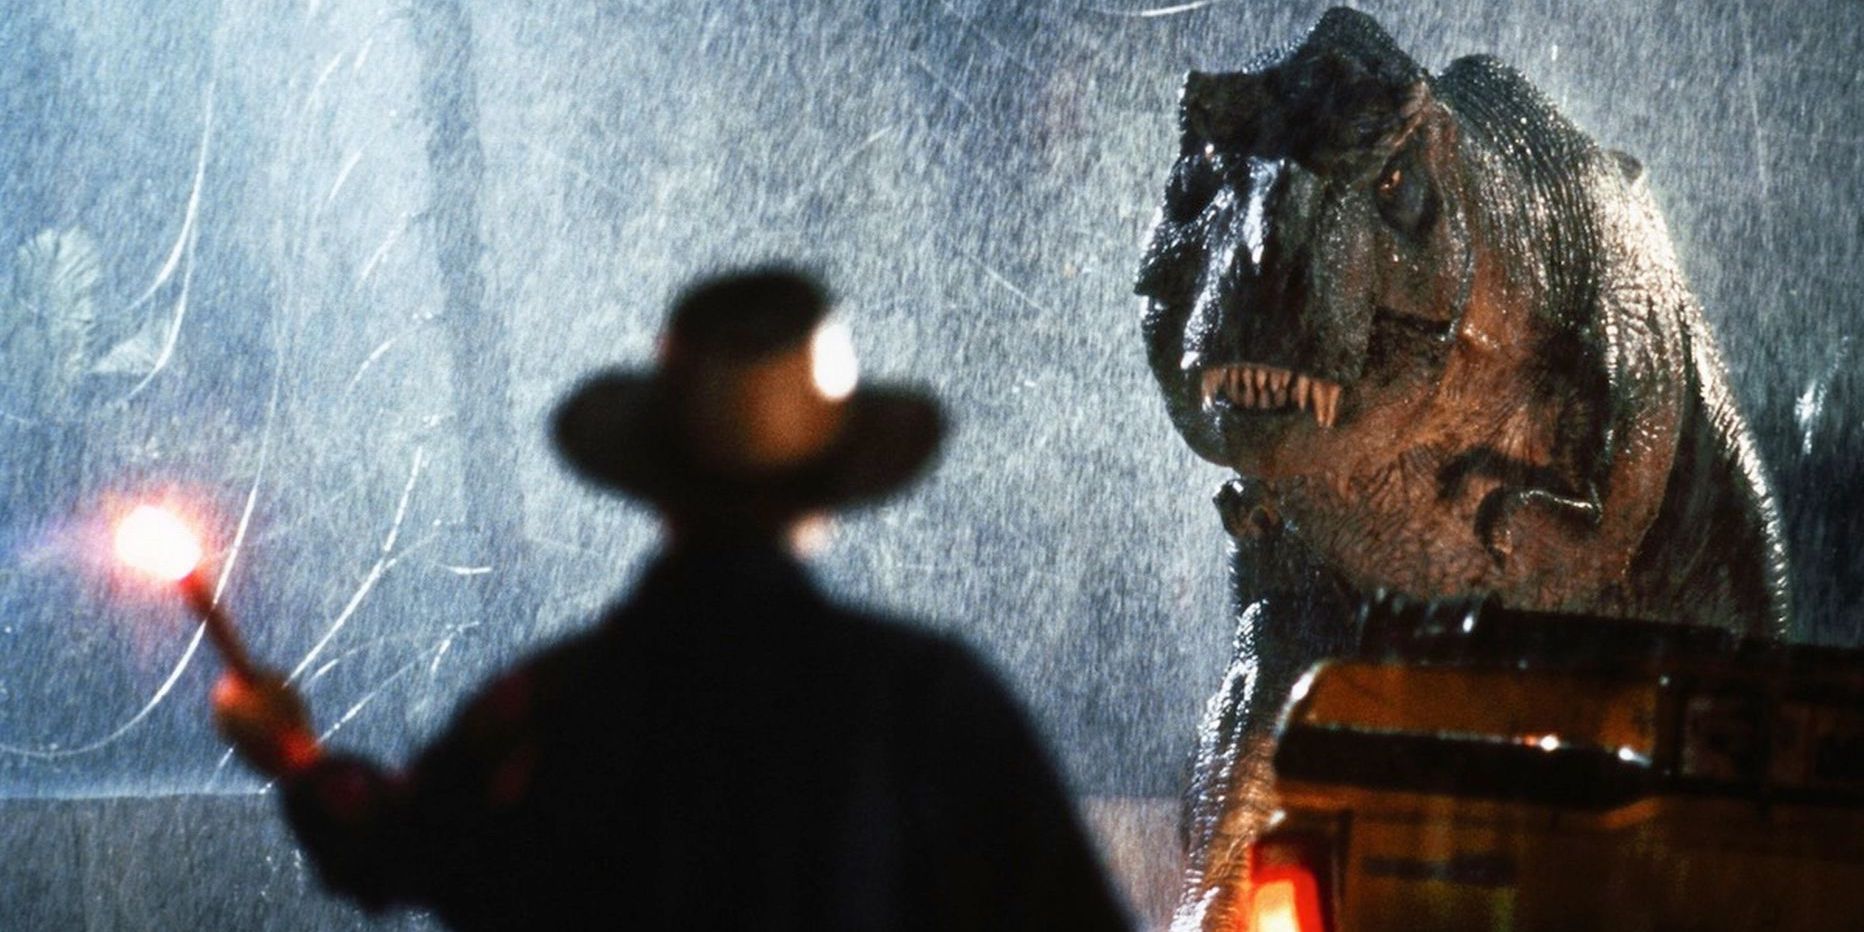 Dr Grant staring down the T-Rex in Jurassic Park movie